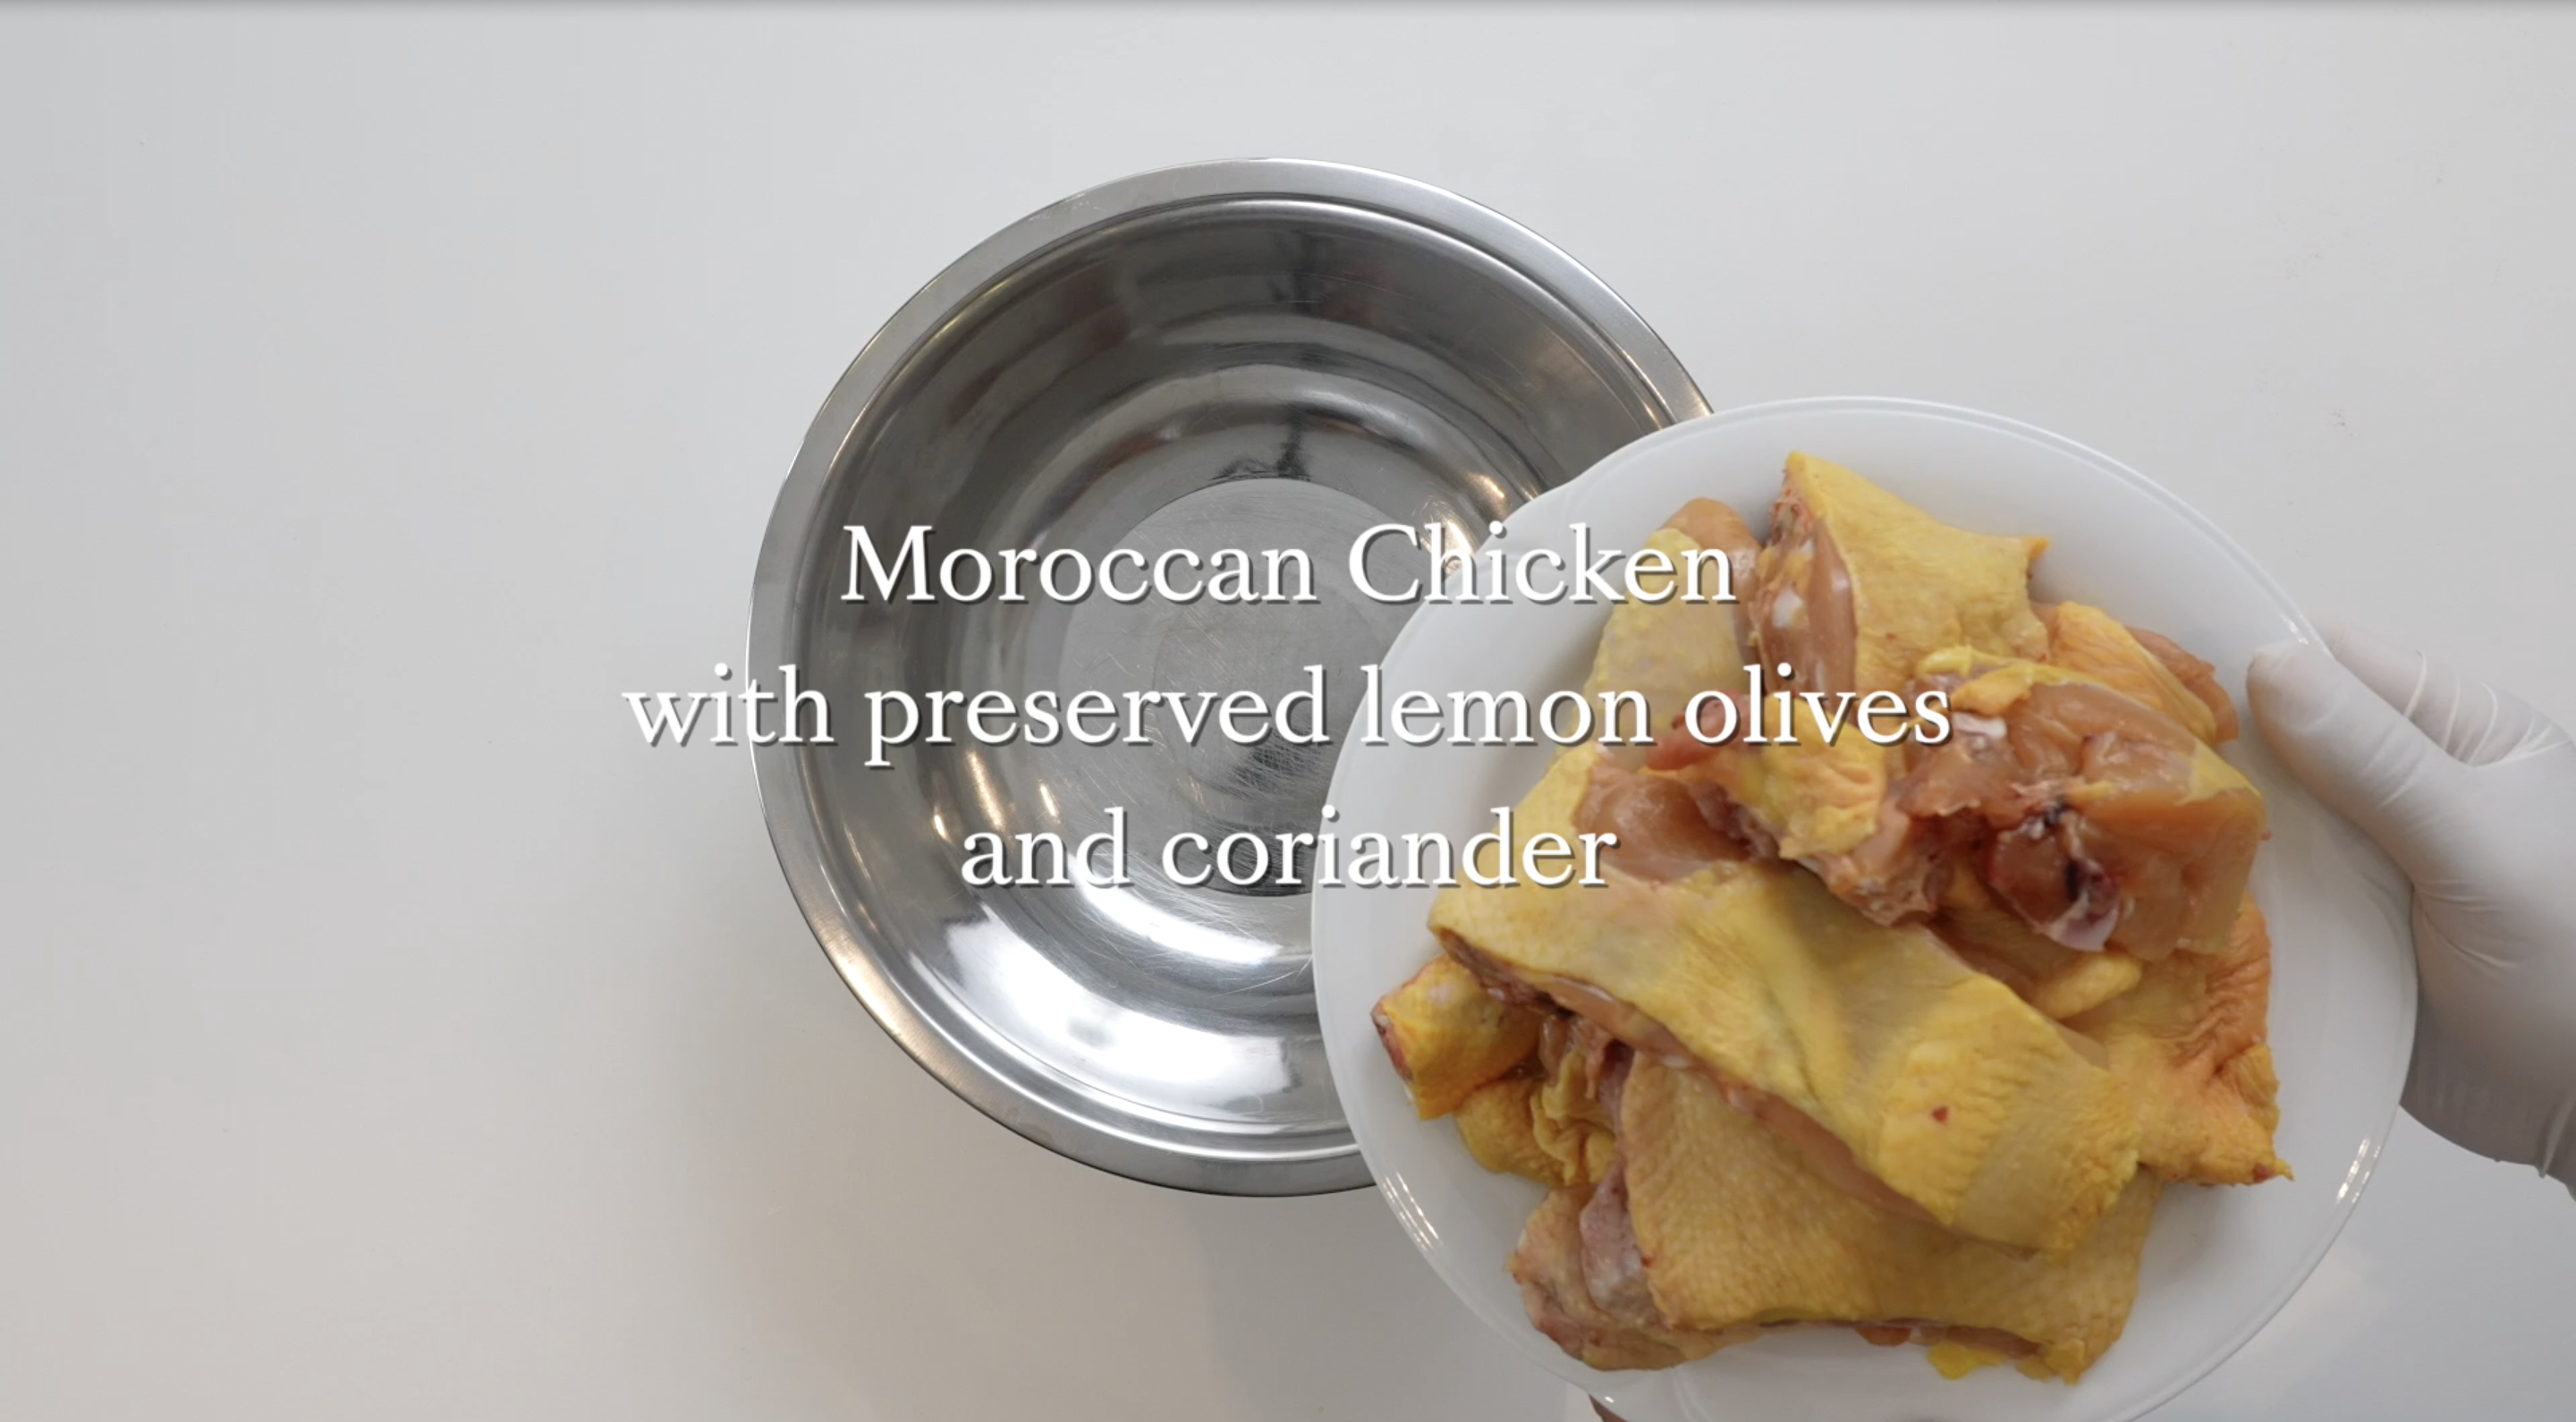 A plate of chopped raw chicken and a mixing bowl ready to prepare Sami Tamimi's Moroccan Chicken recipe.